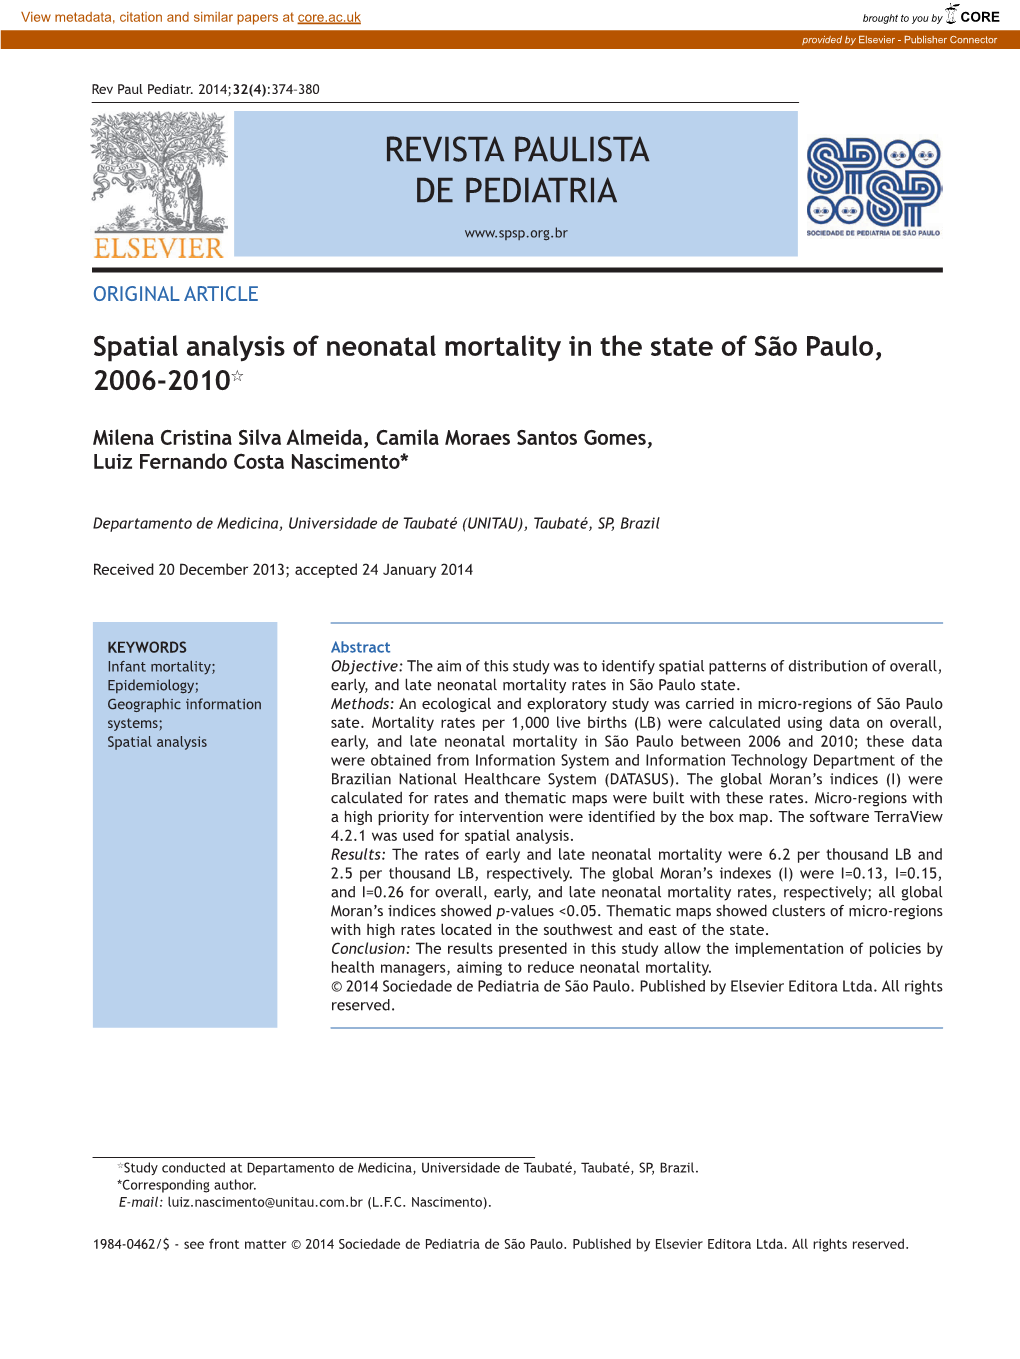 Spatial Analysis of Neonatal Mortality in the State of Sãƒâ£O Paulo, 2006Ã¢Â‚¬Â€Œ2010* *Study Conducted at Depar